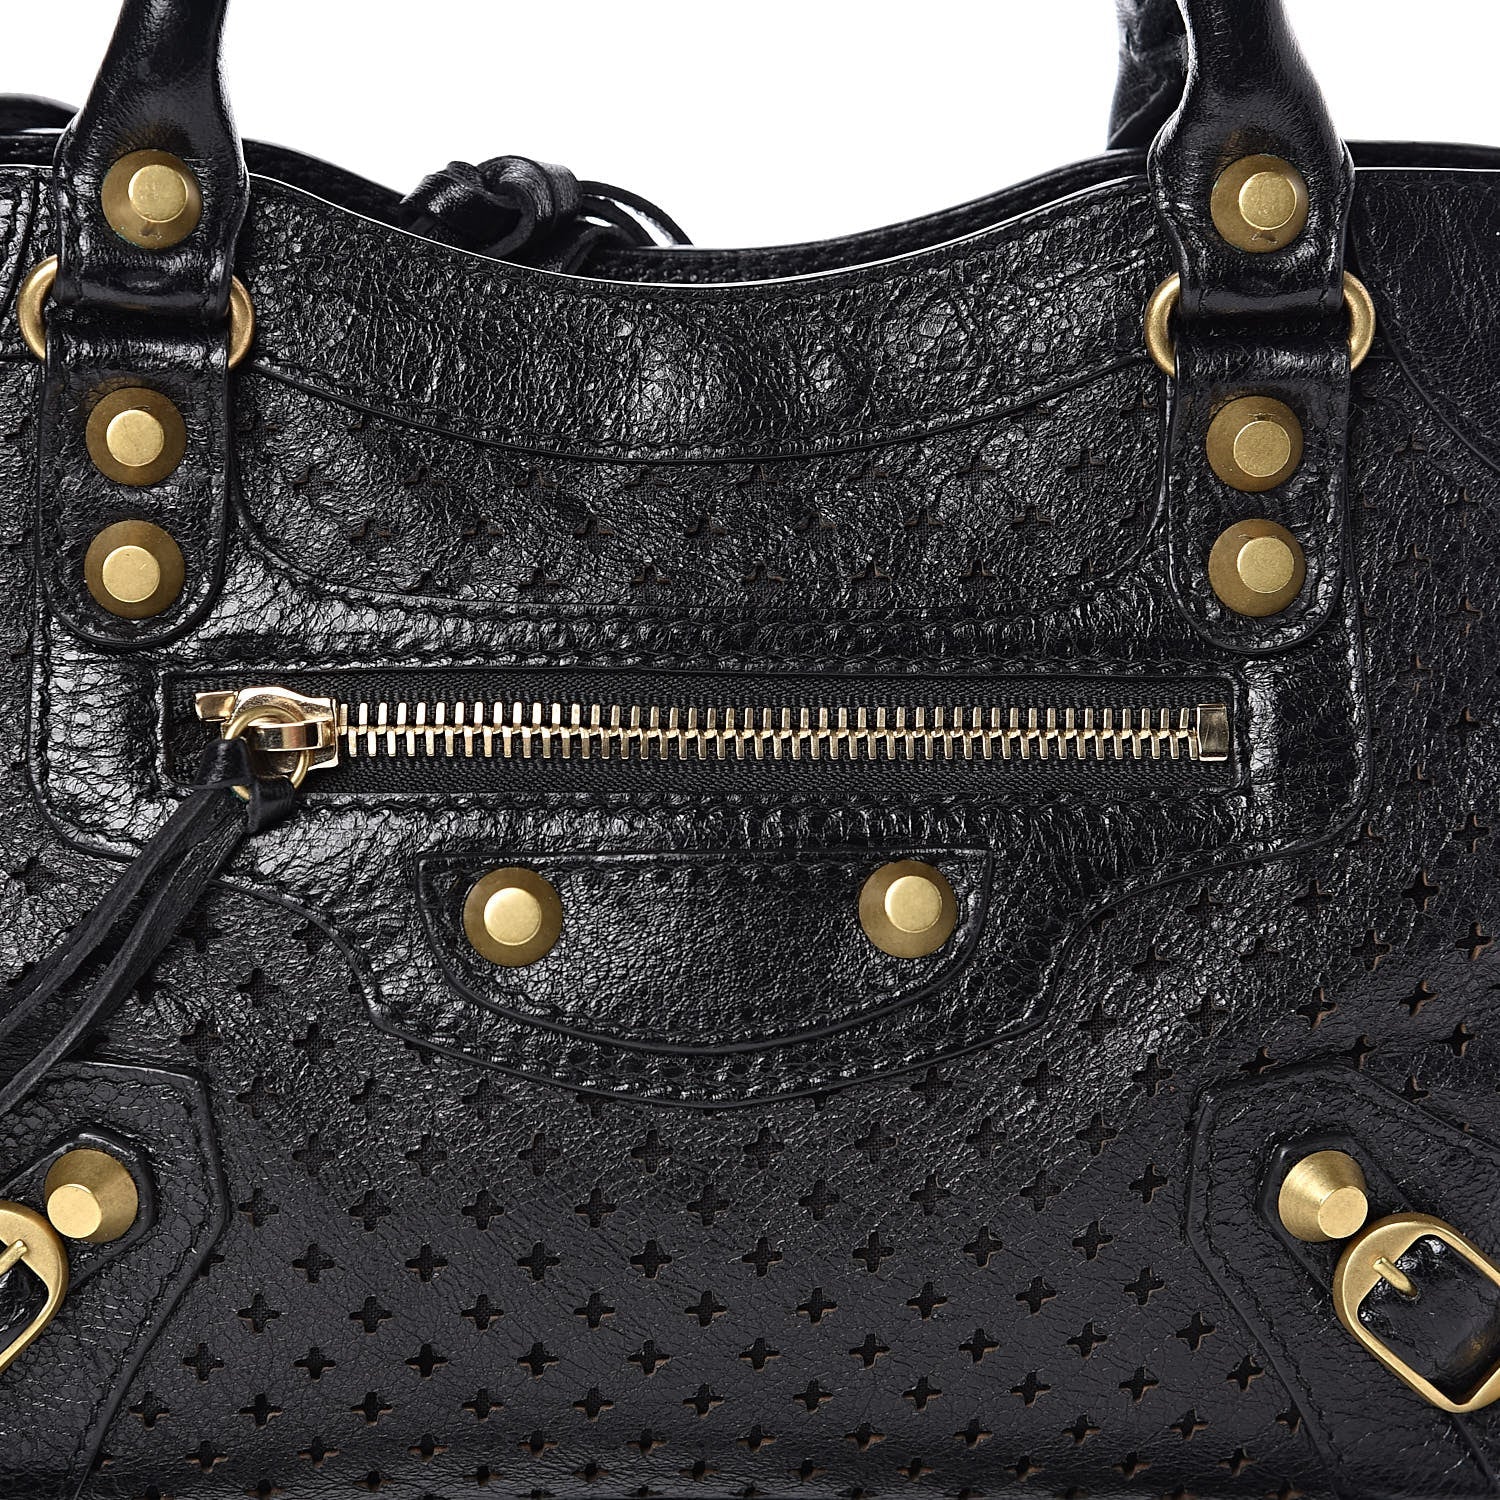 Balenciaga Classic City Black Leather Perforated Mini Satchel Bag 501065 at_Queen_Bee_of_Beverly_Hills